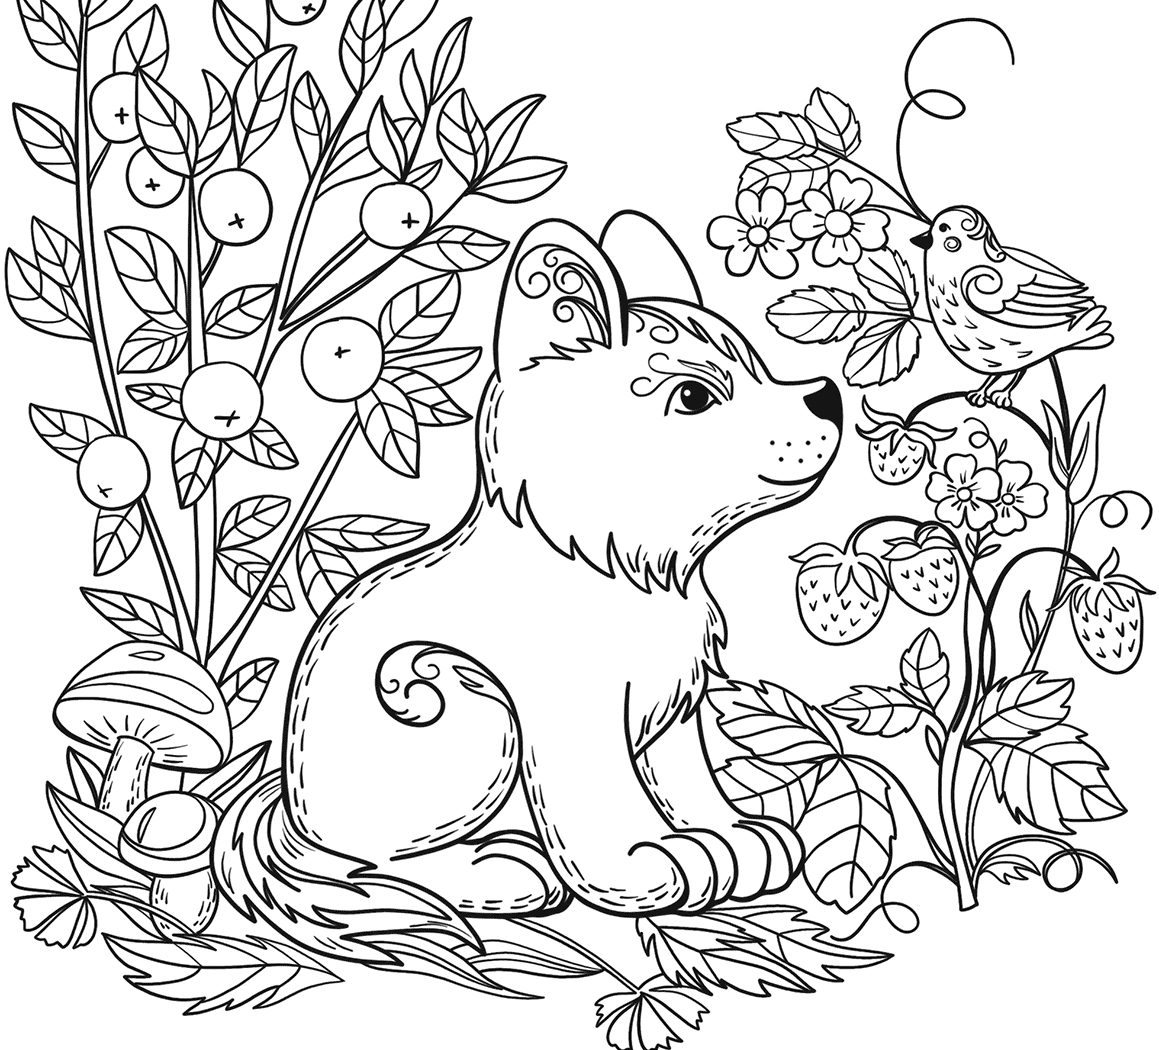 Coffee Table : Printable Animal Coloring Pages Colouring For ...